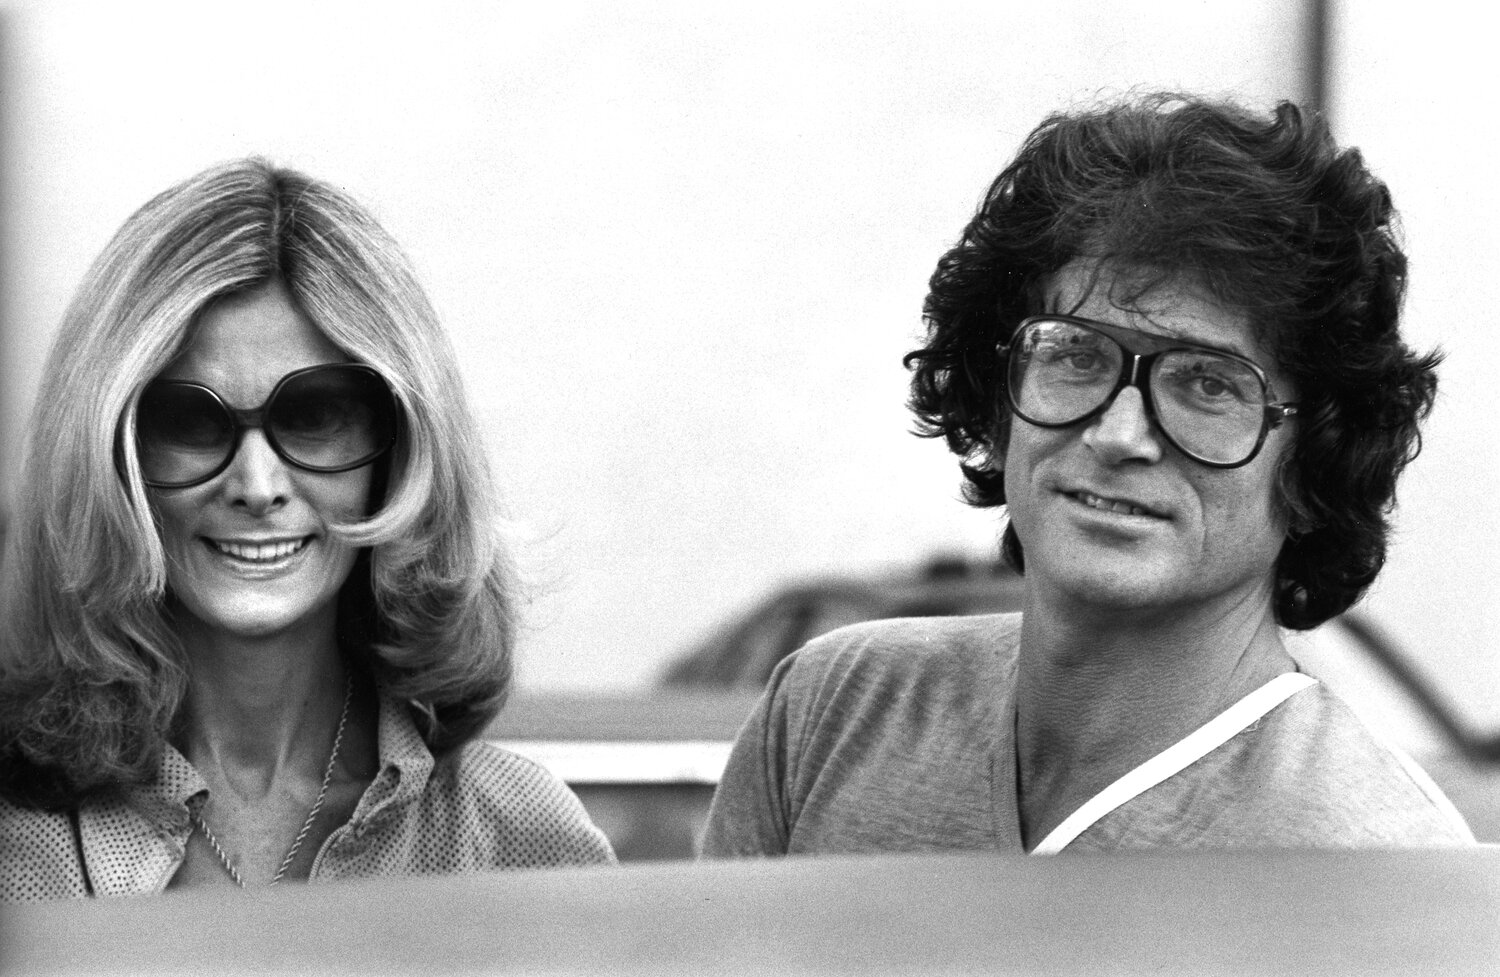 Lynn Noe and Michael Landon on February 9, 1979 on Rodeo Drive in Beverly Hills, California